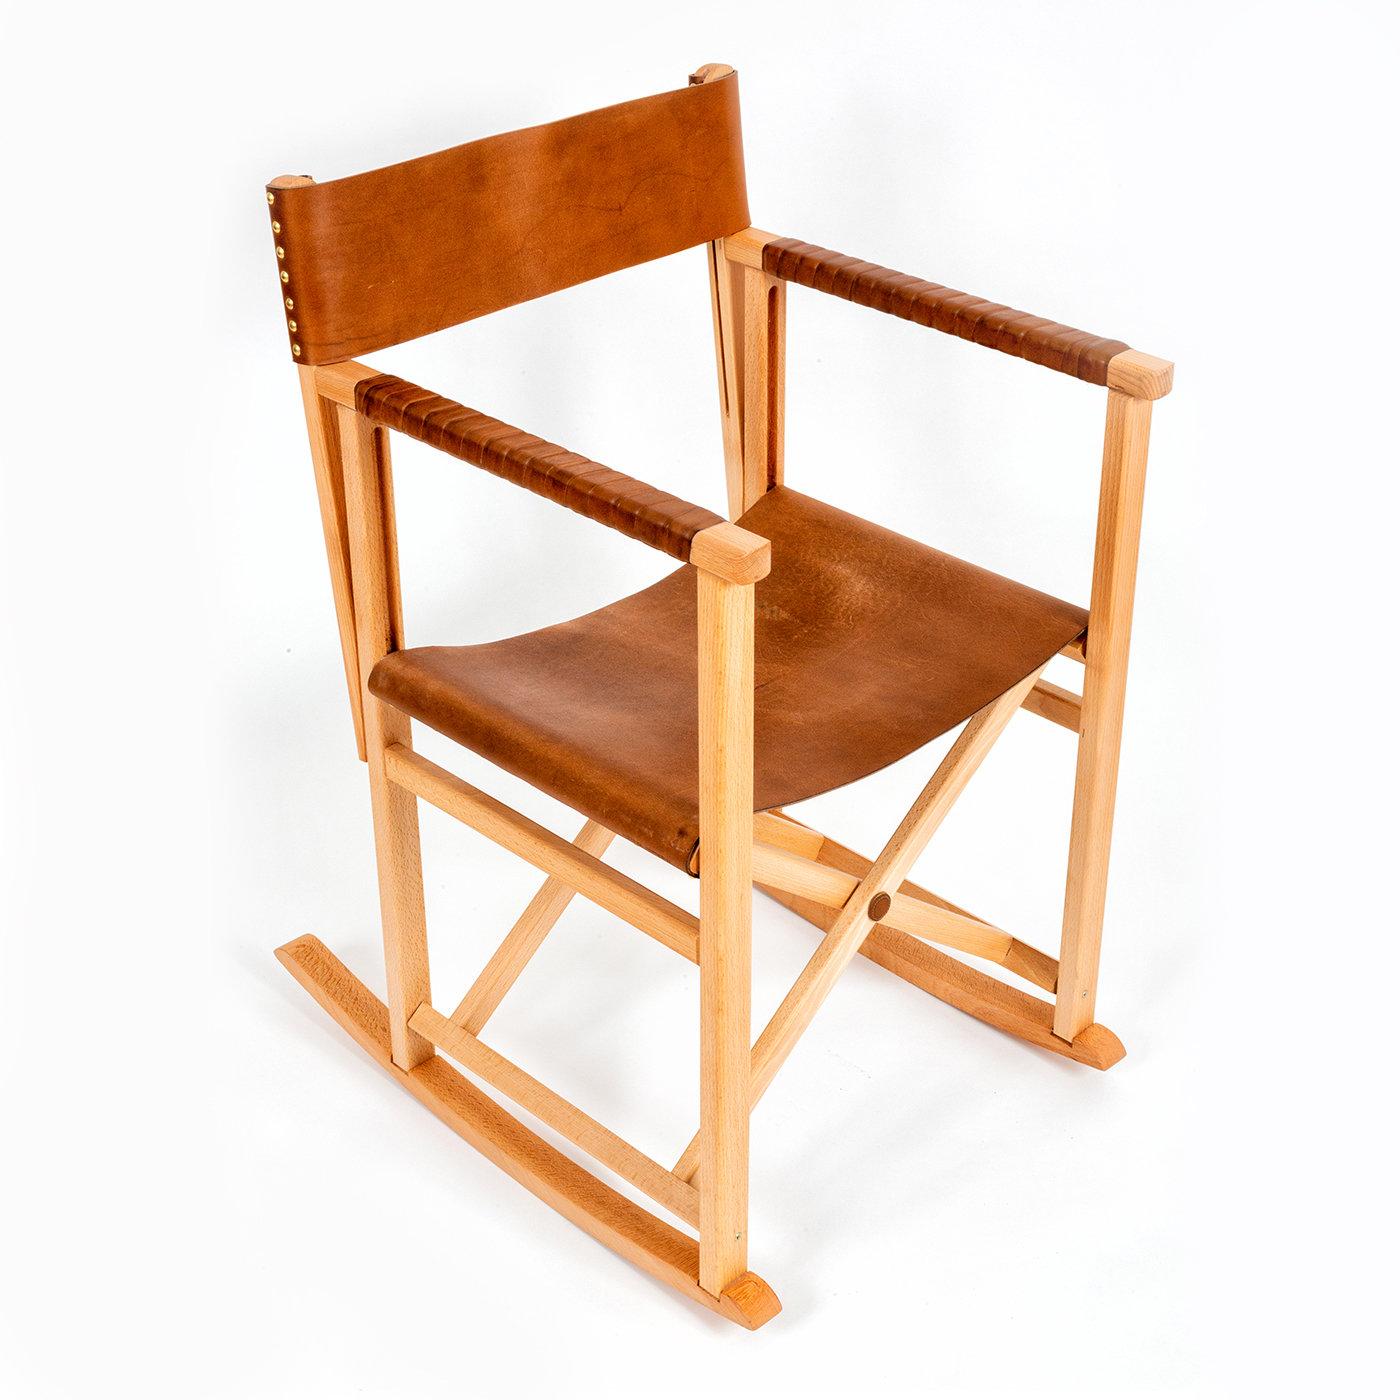 A masterful example of elegant and versatile design, this rocking chair flaunts a sturdy structure of oak wood with backrest and seat (H 48 cm) of prized leather, which also covers the linear armrests to offer further comfort. This attractive chair